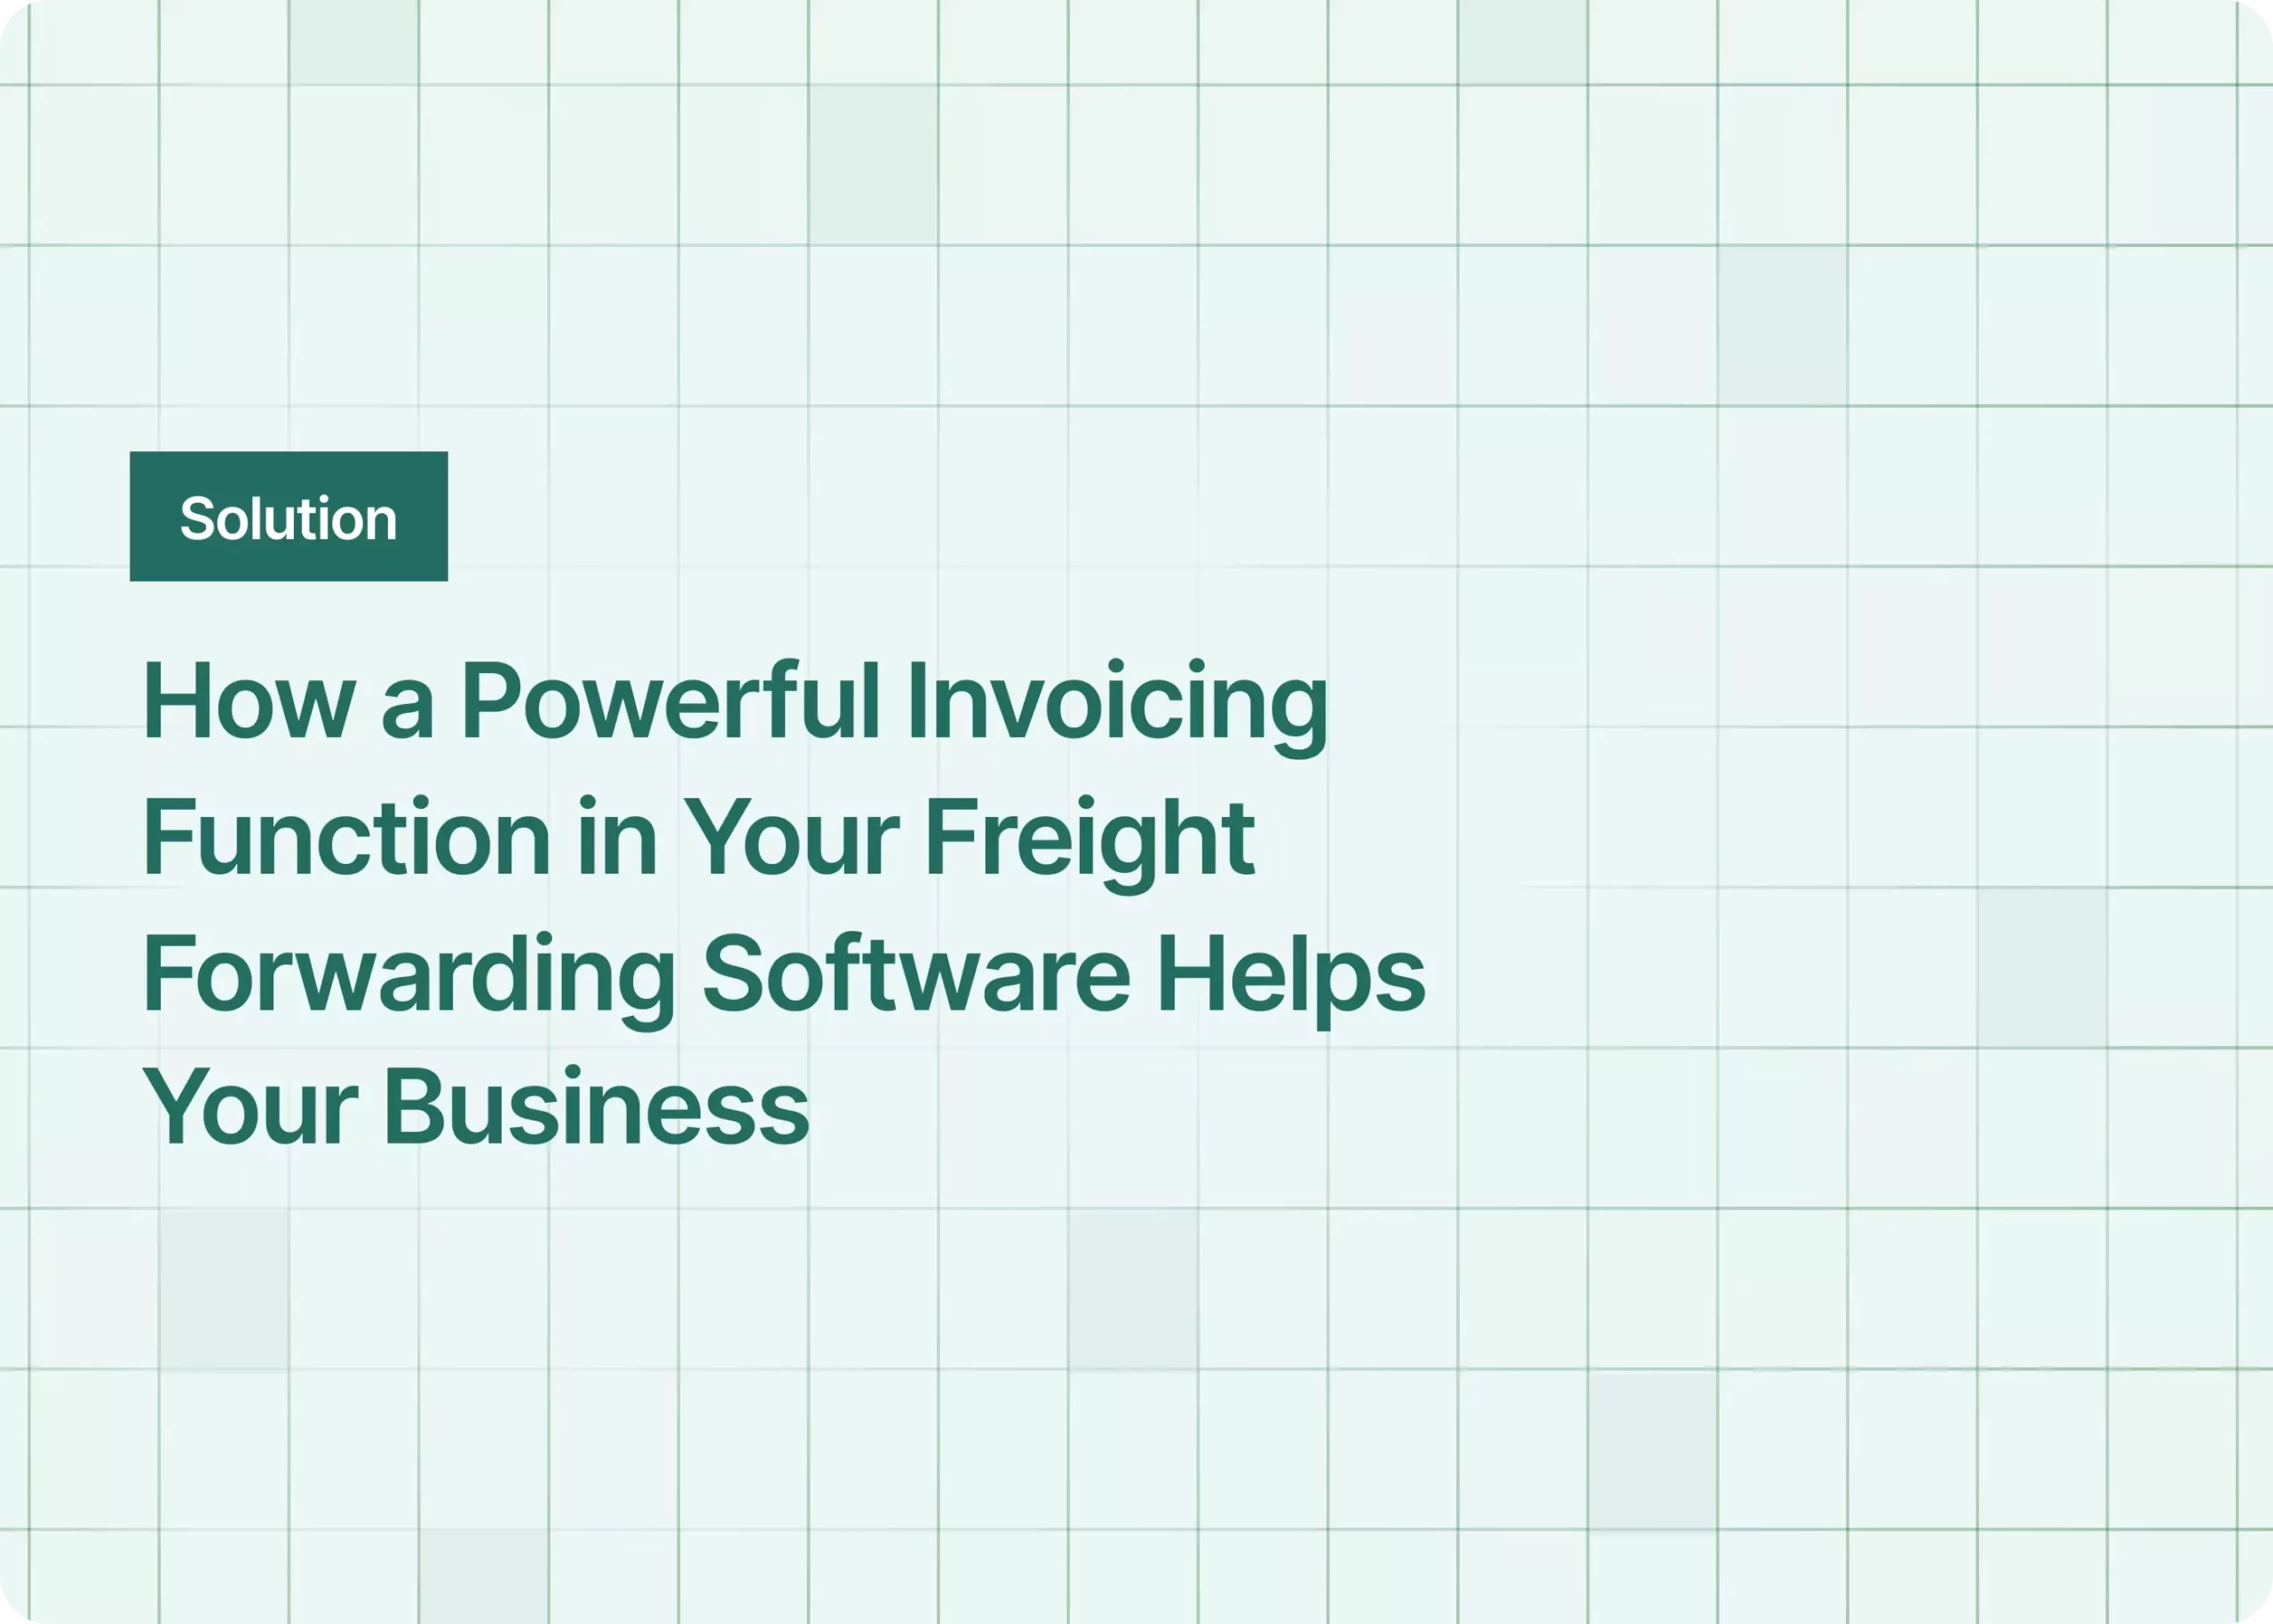 How a Powerful Invoicing Function in Your Freight Forwarding Software Helps Your Business